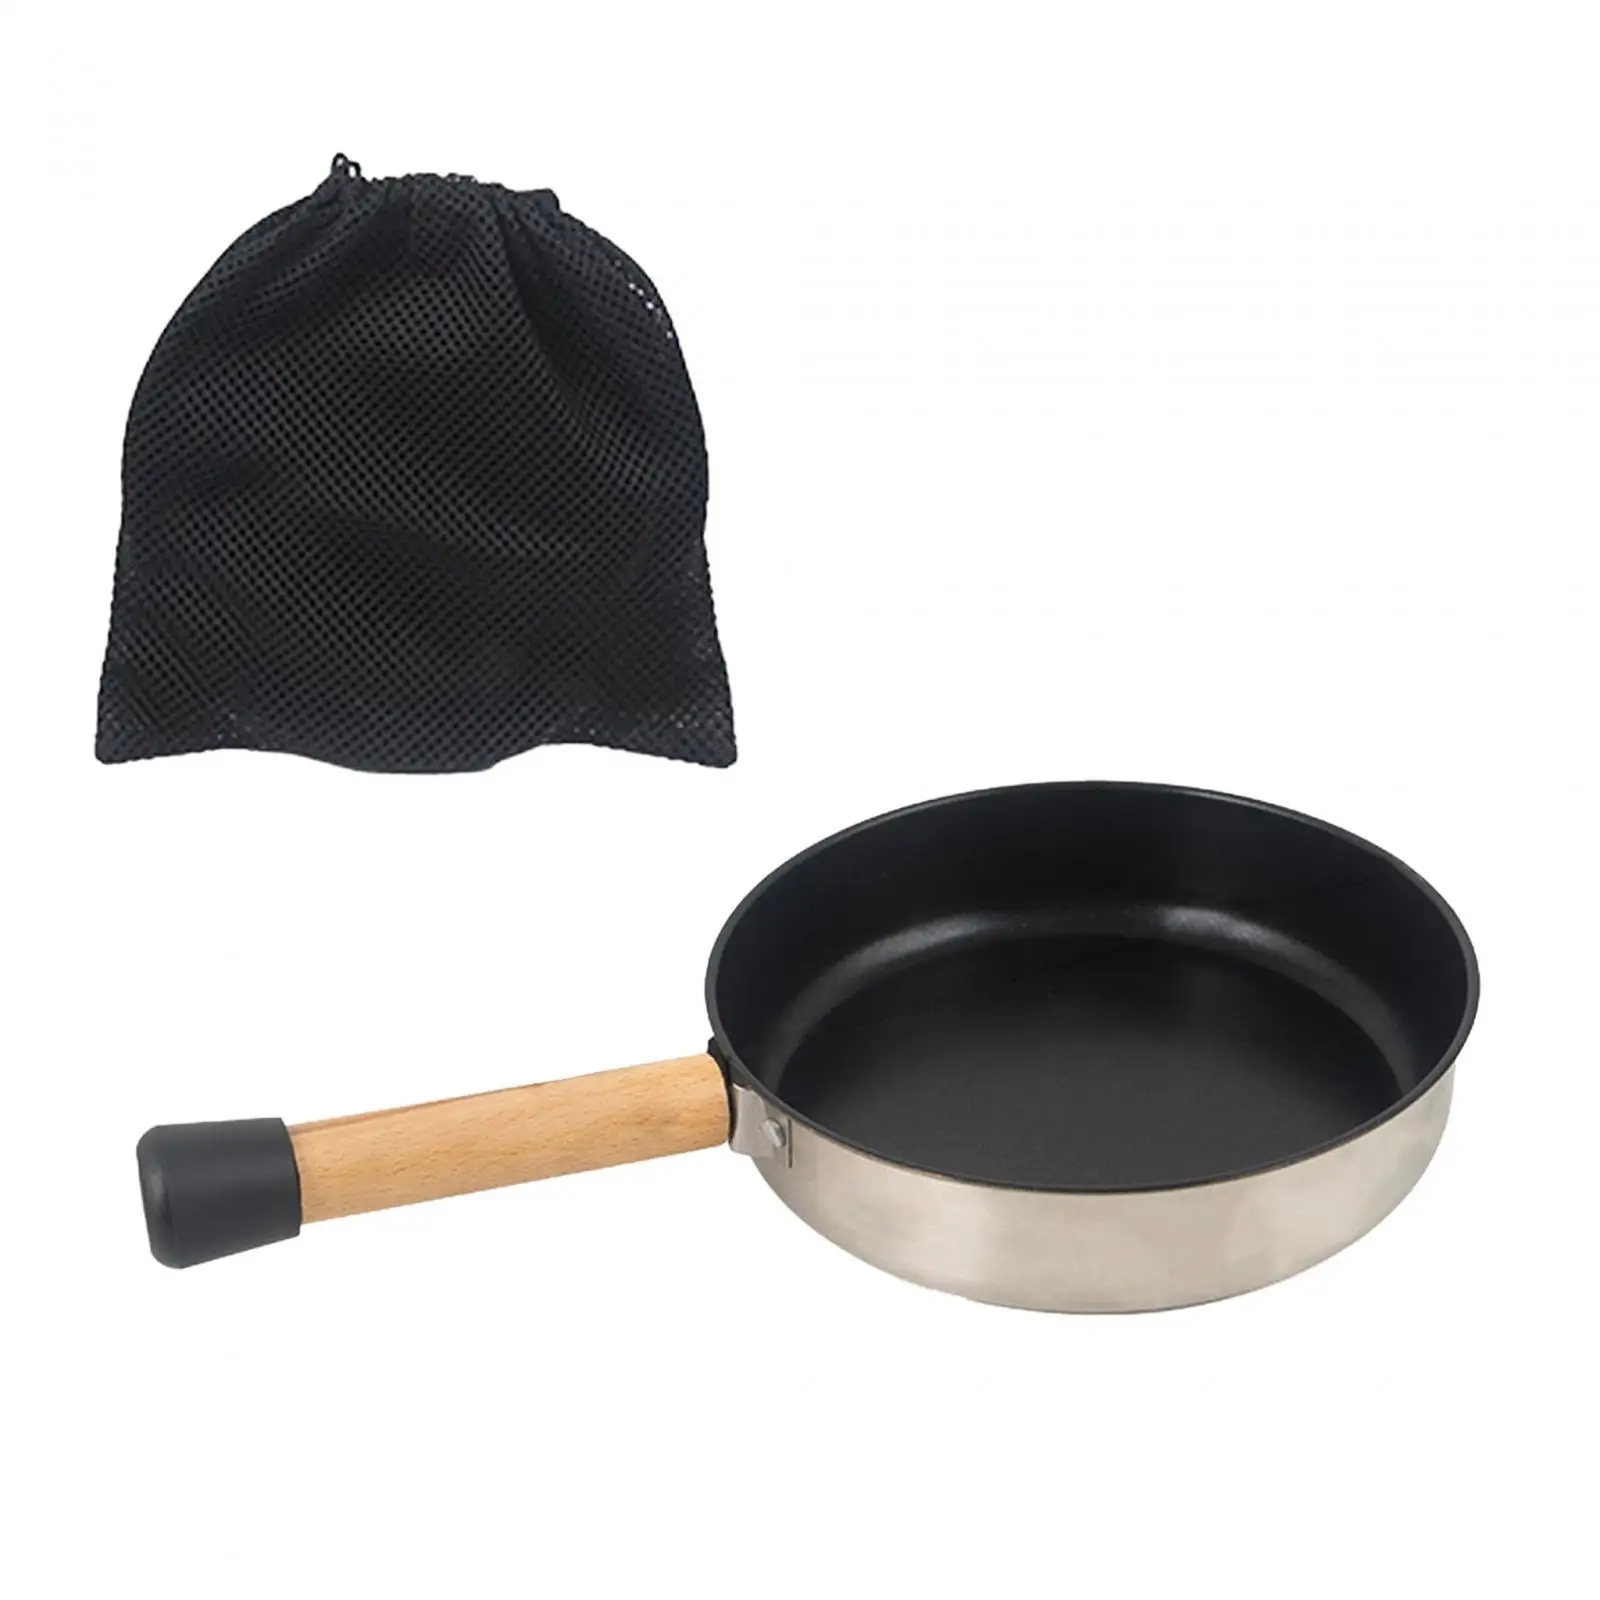 Camping Frying Pan Nonstick Fry Pan Equipment Cooker with Removable Handle Nonstick Flat Griddle Pan for Picnic Camping